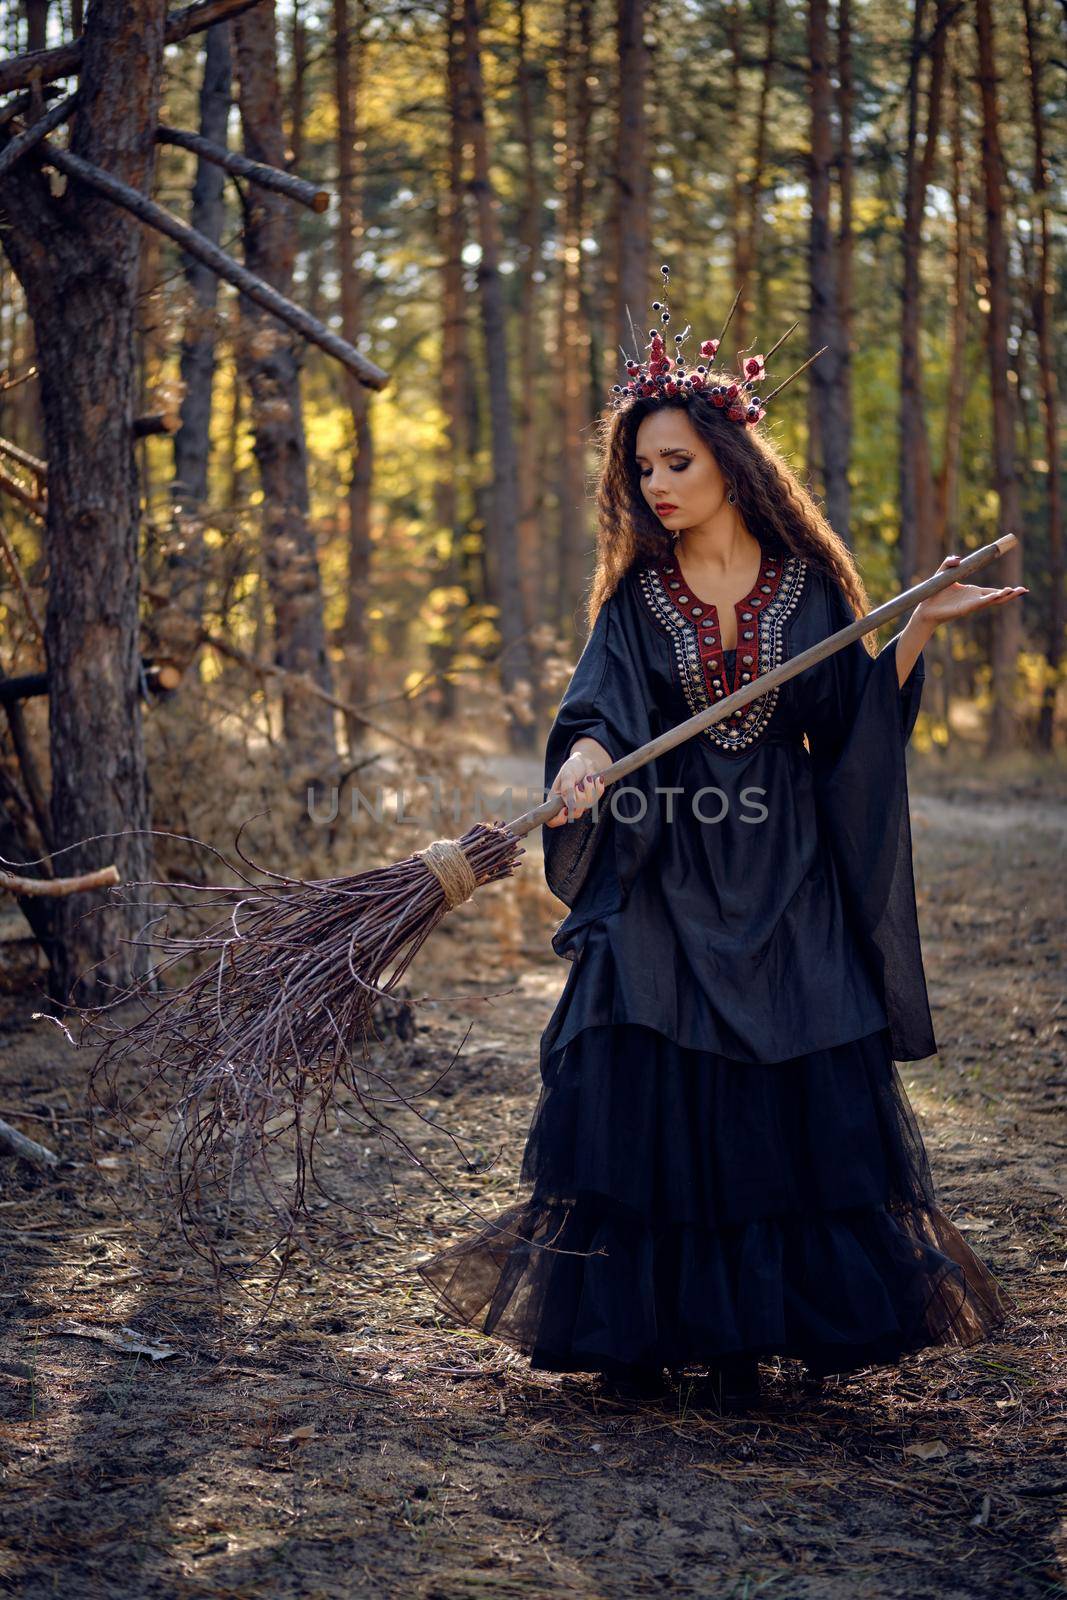 Witch in black, long dress, with red crown in her long hair. Posing with broom in pine forest. Spells, magic and witchcraft. Full length portrait. by nazarovsergey